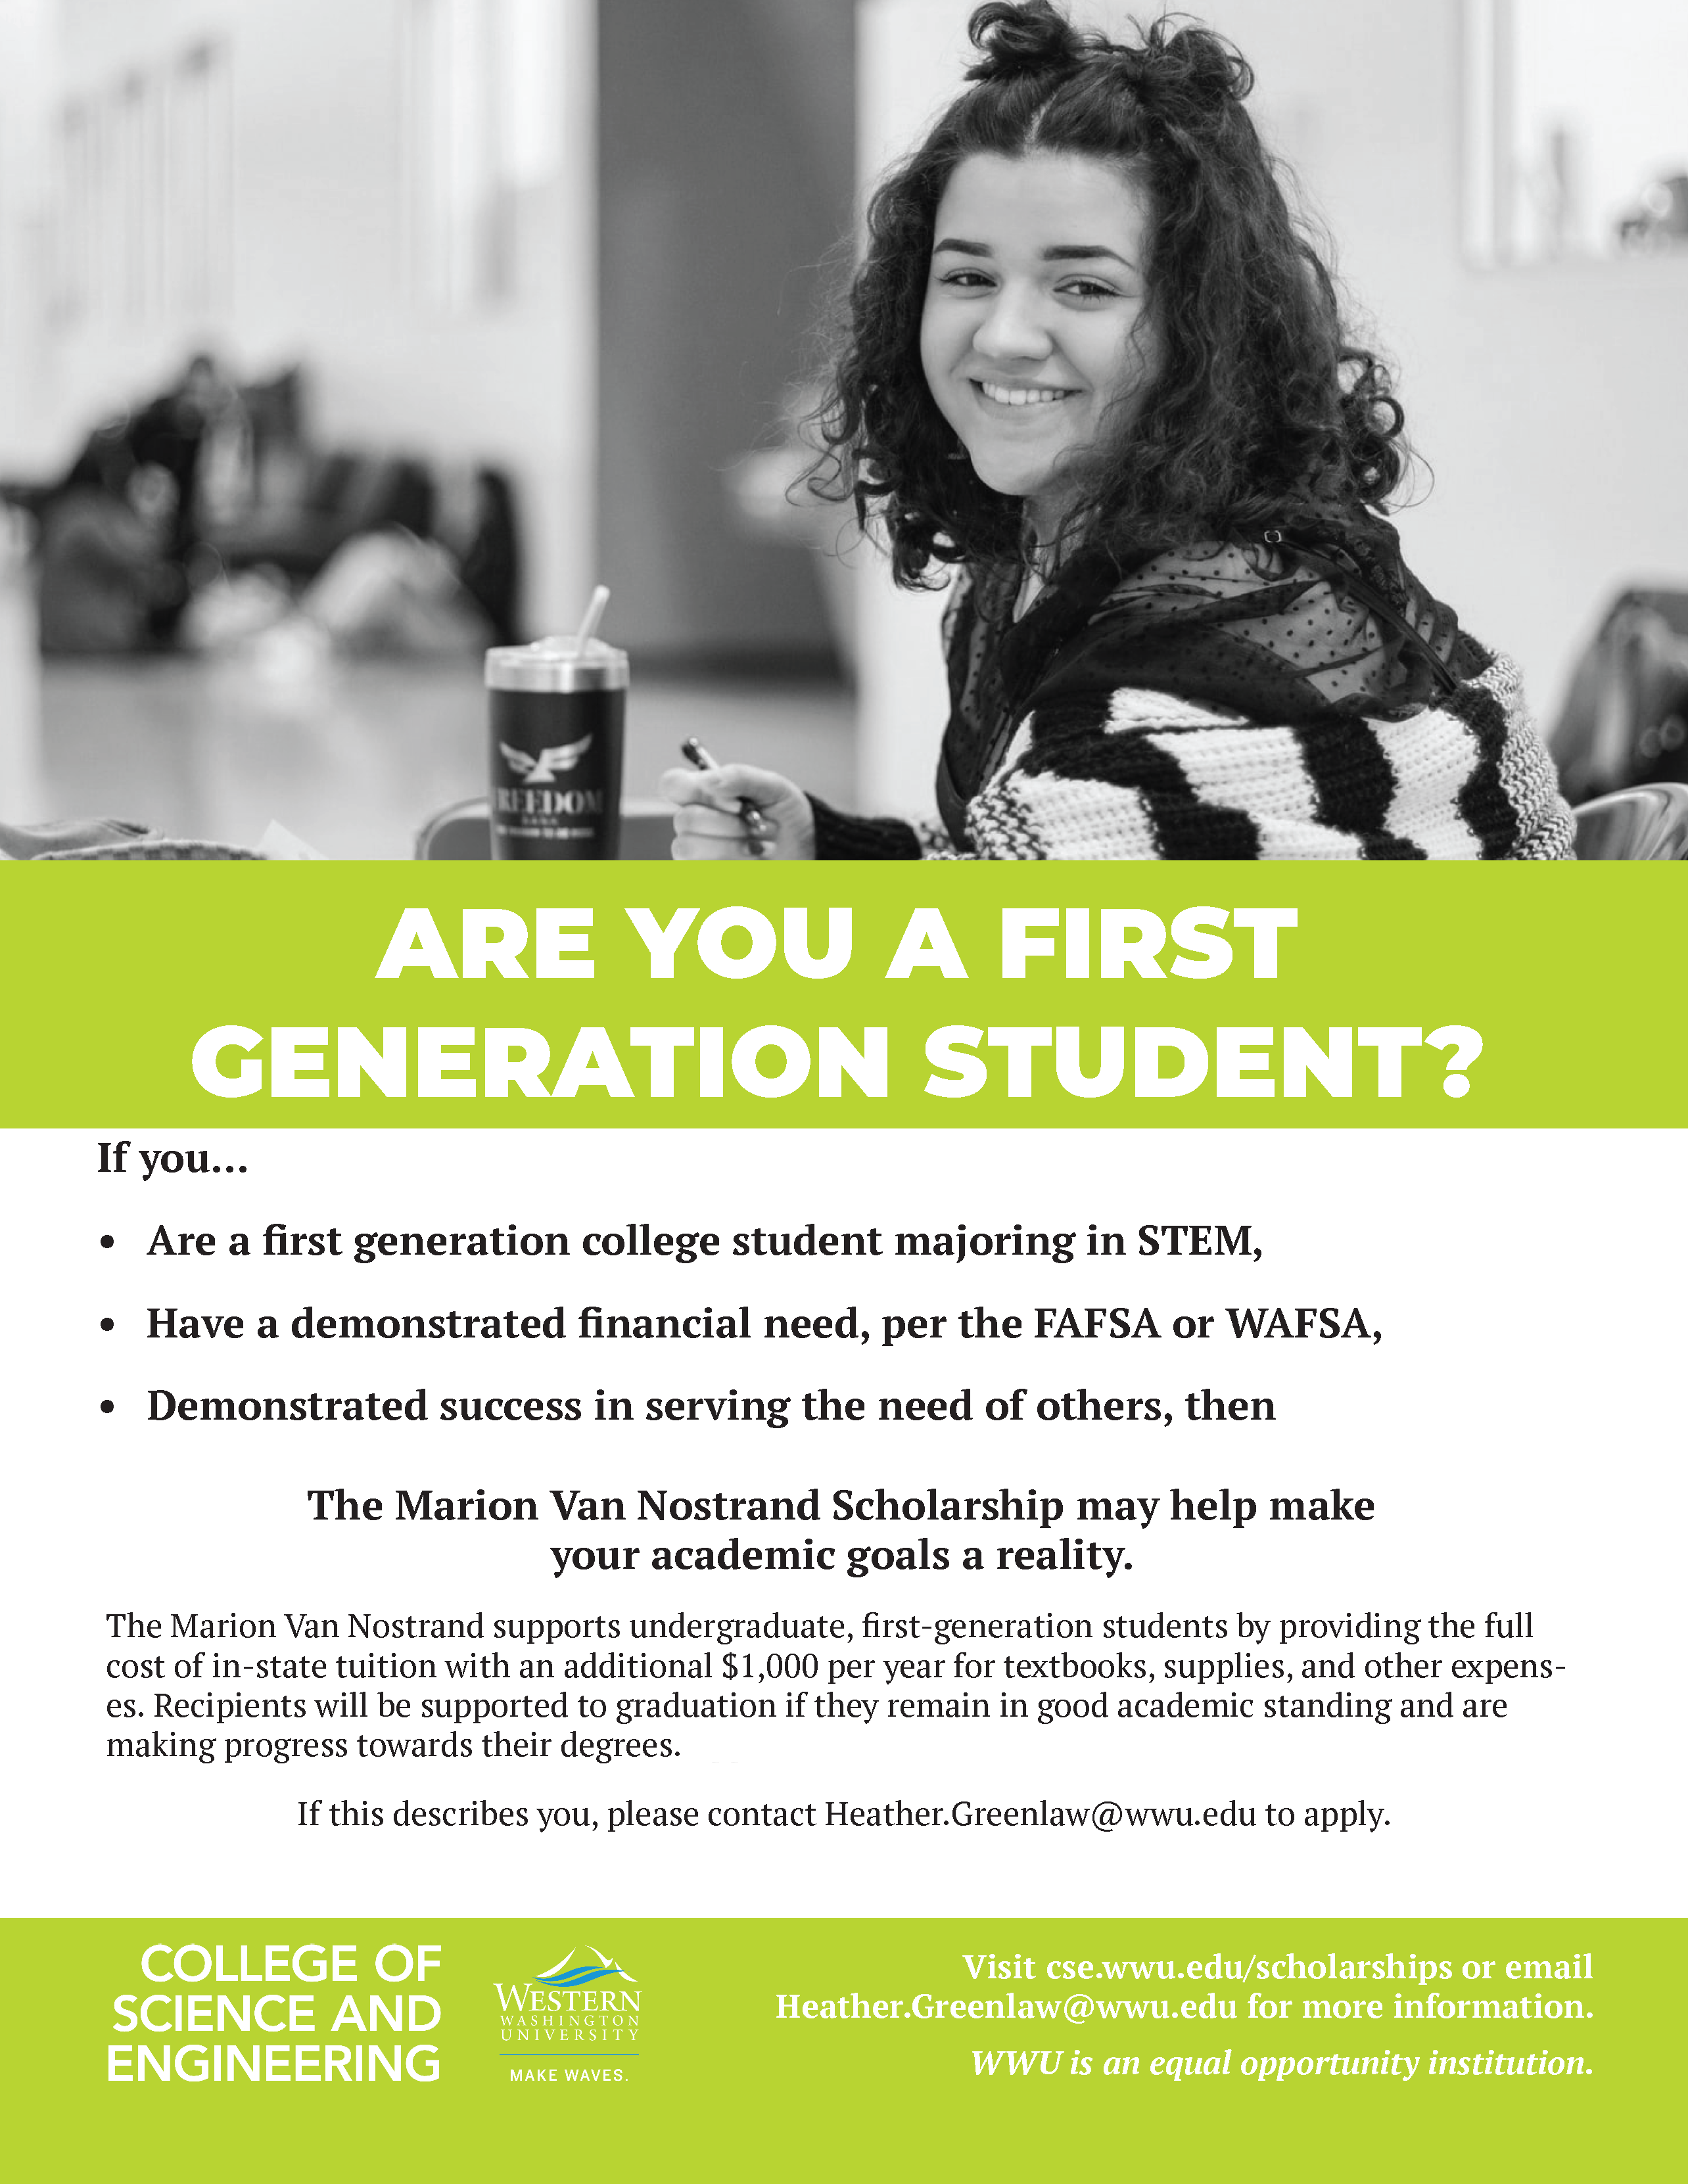 If you are a first generation college student majoring in STEM, Have a demonstrated financial need, per the FAFSA or WAFSA, Demonstrated success in serving the need of others, then The Marion Van Nostrand Scholarship may help make your academic goals a reality. The Marion Van Nostrand supports undergraduate, first-generation students by providing the full cost of in-state tuition with an additional $1,000 per year for textbooks, supplies, and other expenses.